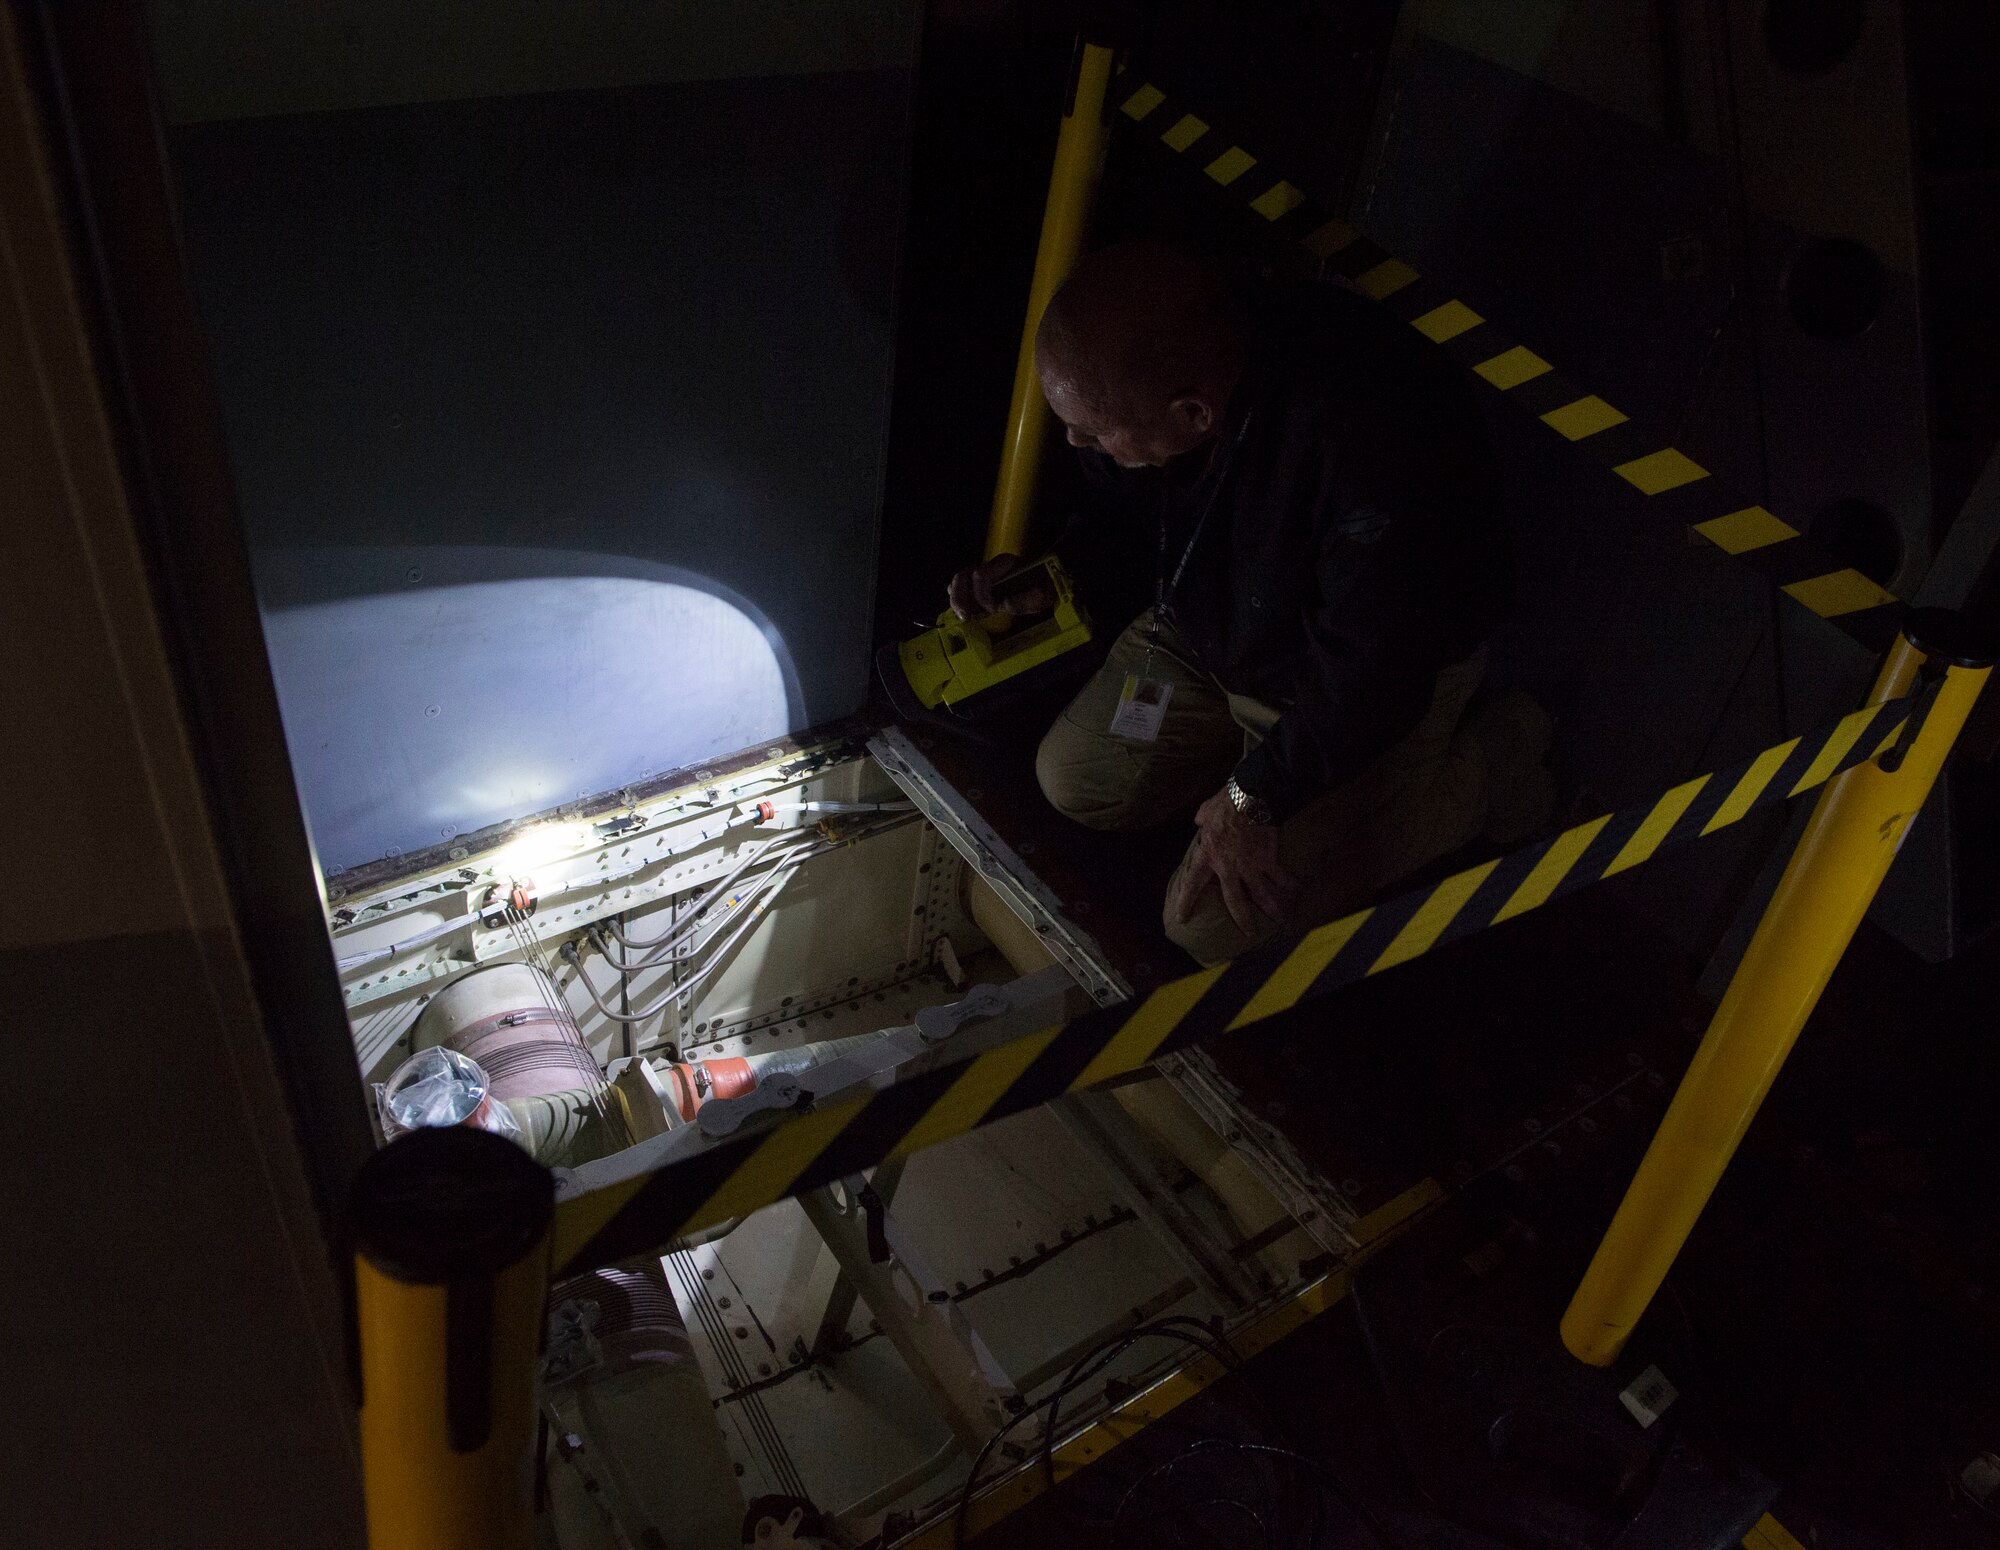 Daniel Mars, a research corrosion analyst assigned to Air Force Corrosion Protection Office, searches the lavatory area of a C-17 Globemaster III for chemical residue and damage August 22, 2018, Altus Air Force Base, Oklahoma. AFCPO dispatches teams to Air Force bases in order to examine aircraft for corrosion.